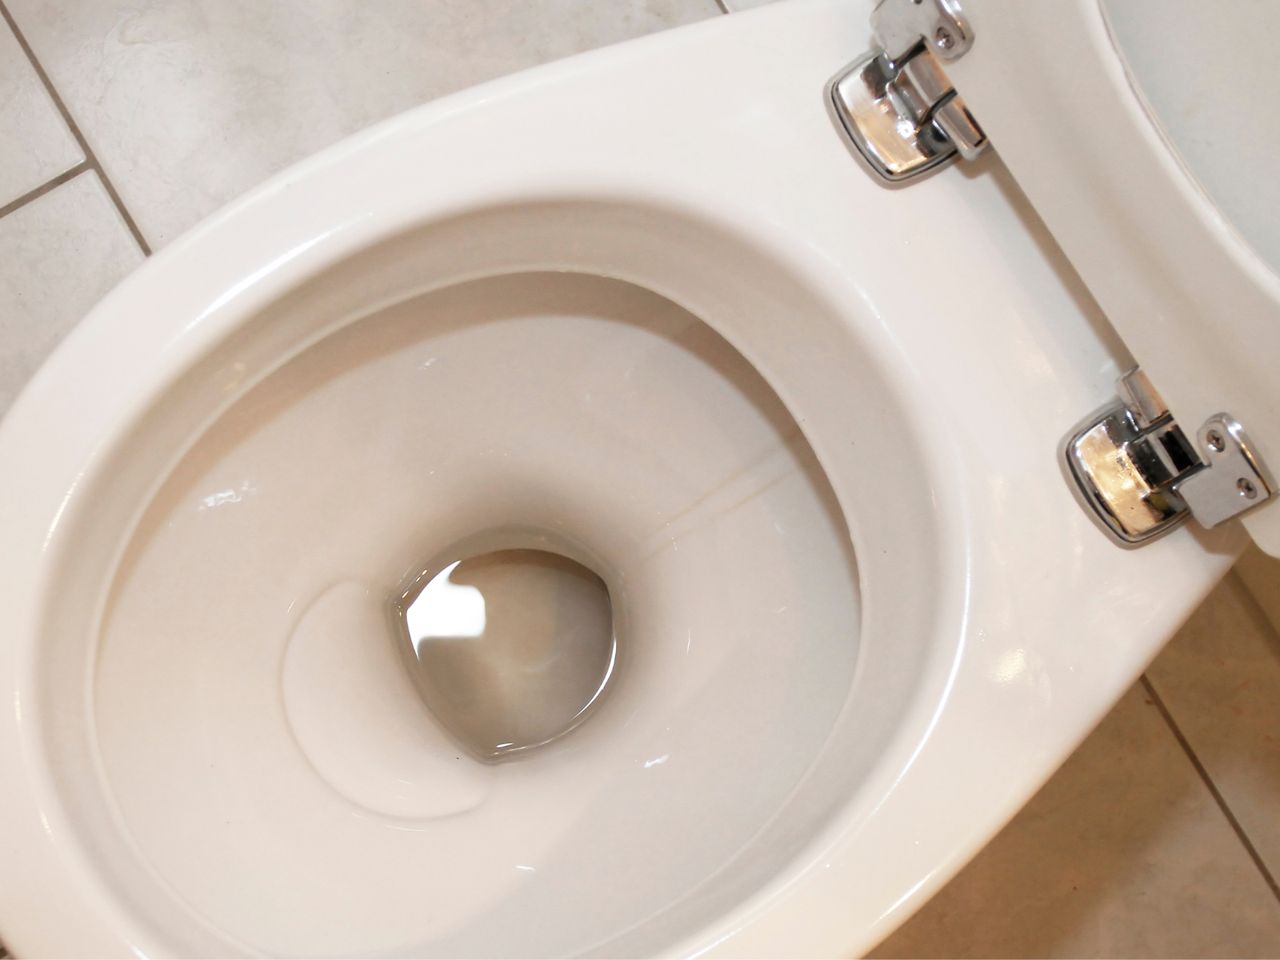 Revolutionize your toilet cleaning: How you can ditch store-bought chemicals for homemade freshness